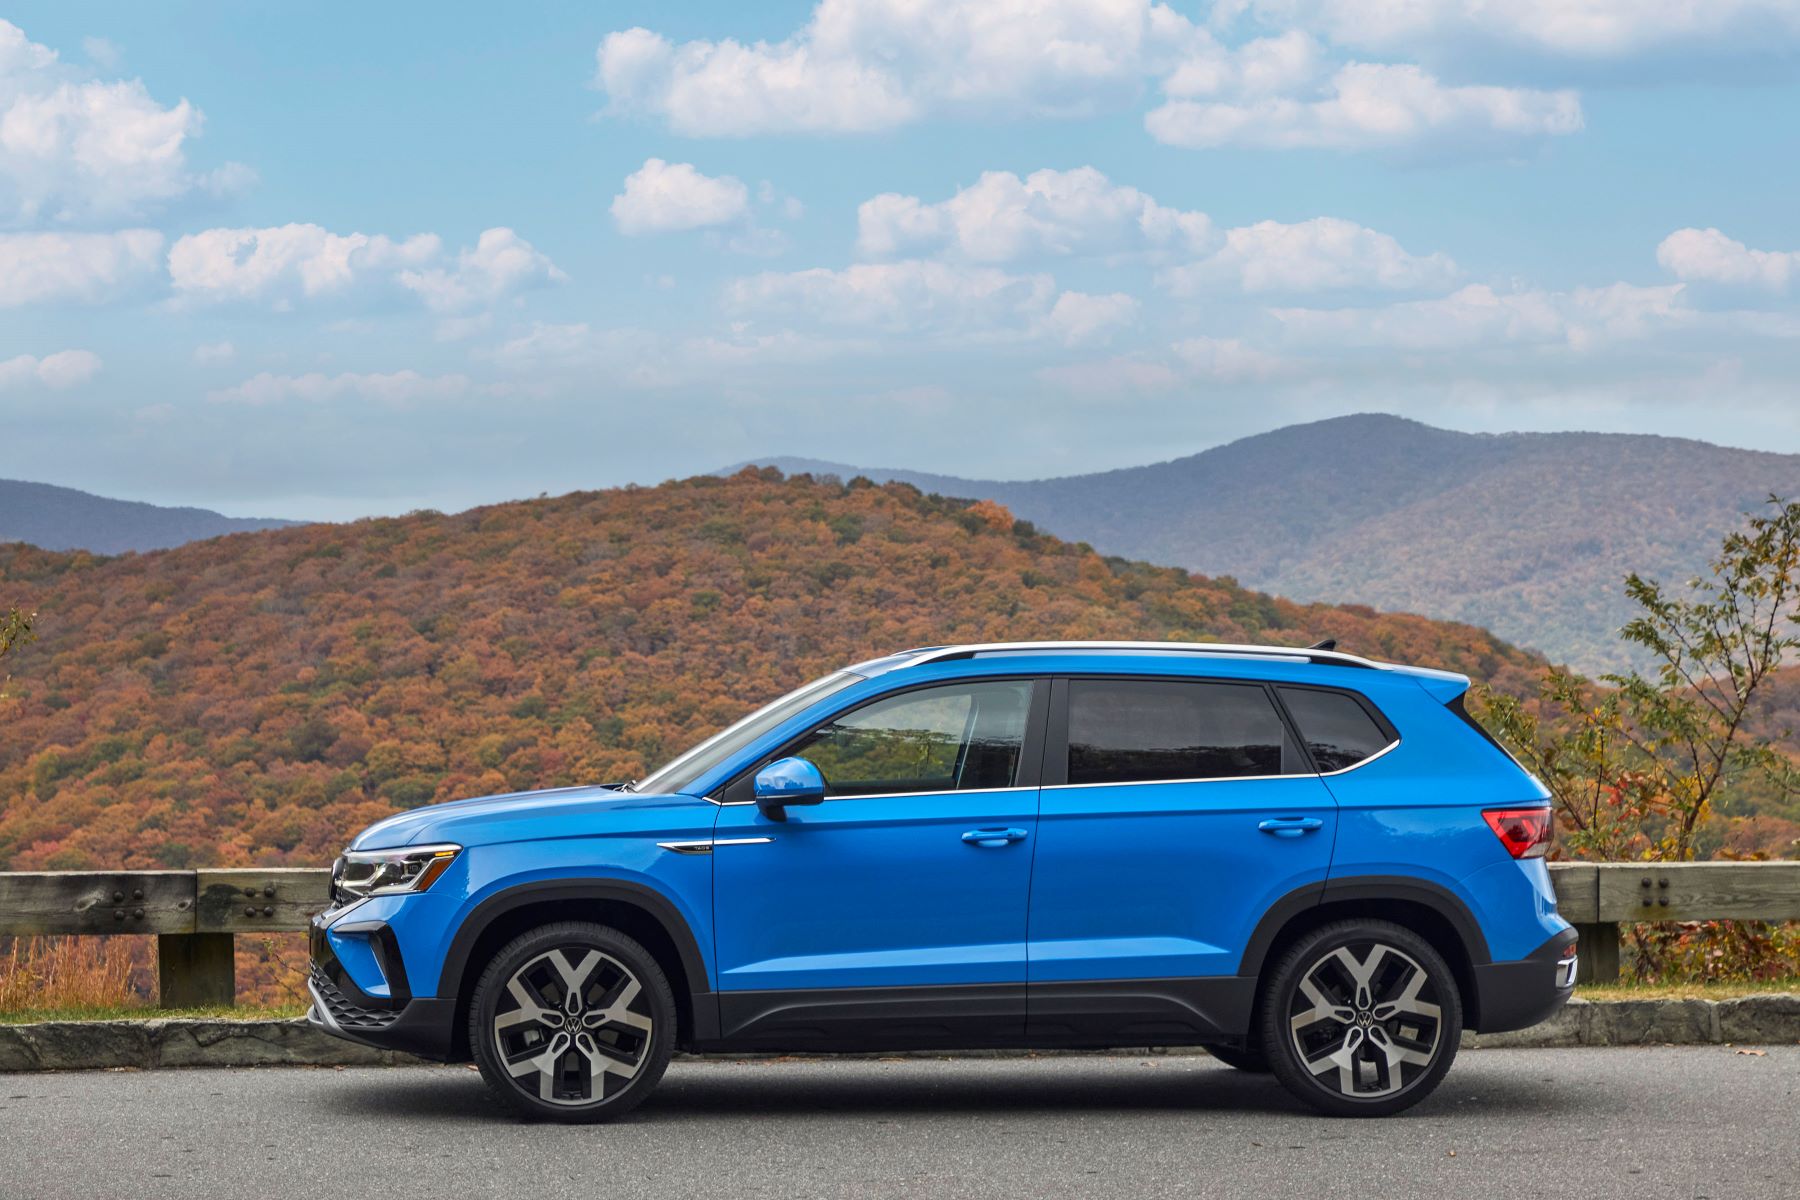 A side profile shot of a blue 2022 Volkswagen Taos compact SUV model parked near wooden fencing near forest hills